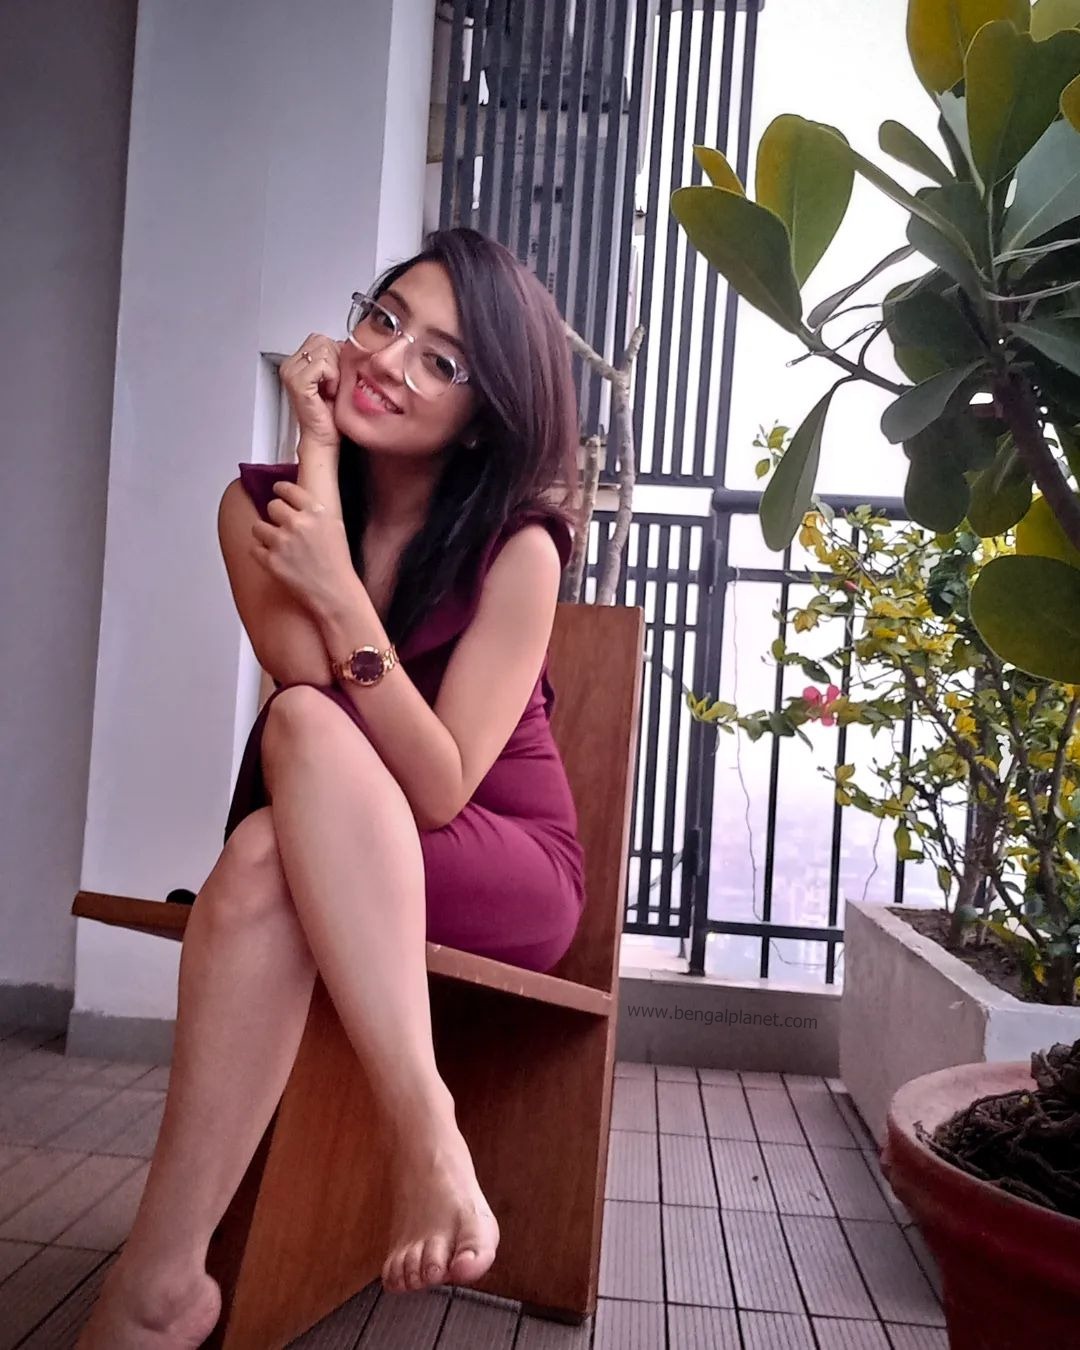 Actress-Sneha-Das-looks-so-cute-and-hot-in-these-photos-10-Bengalplanet.com